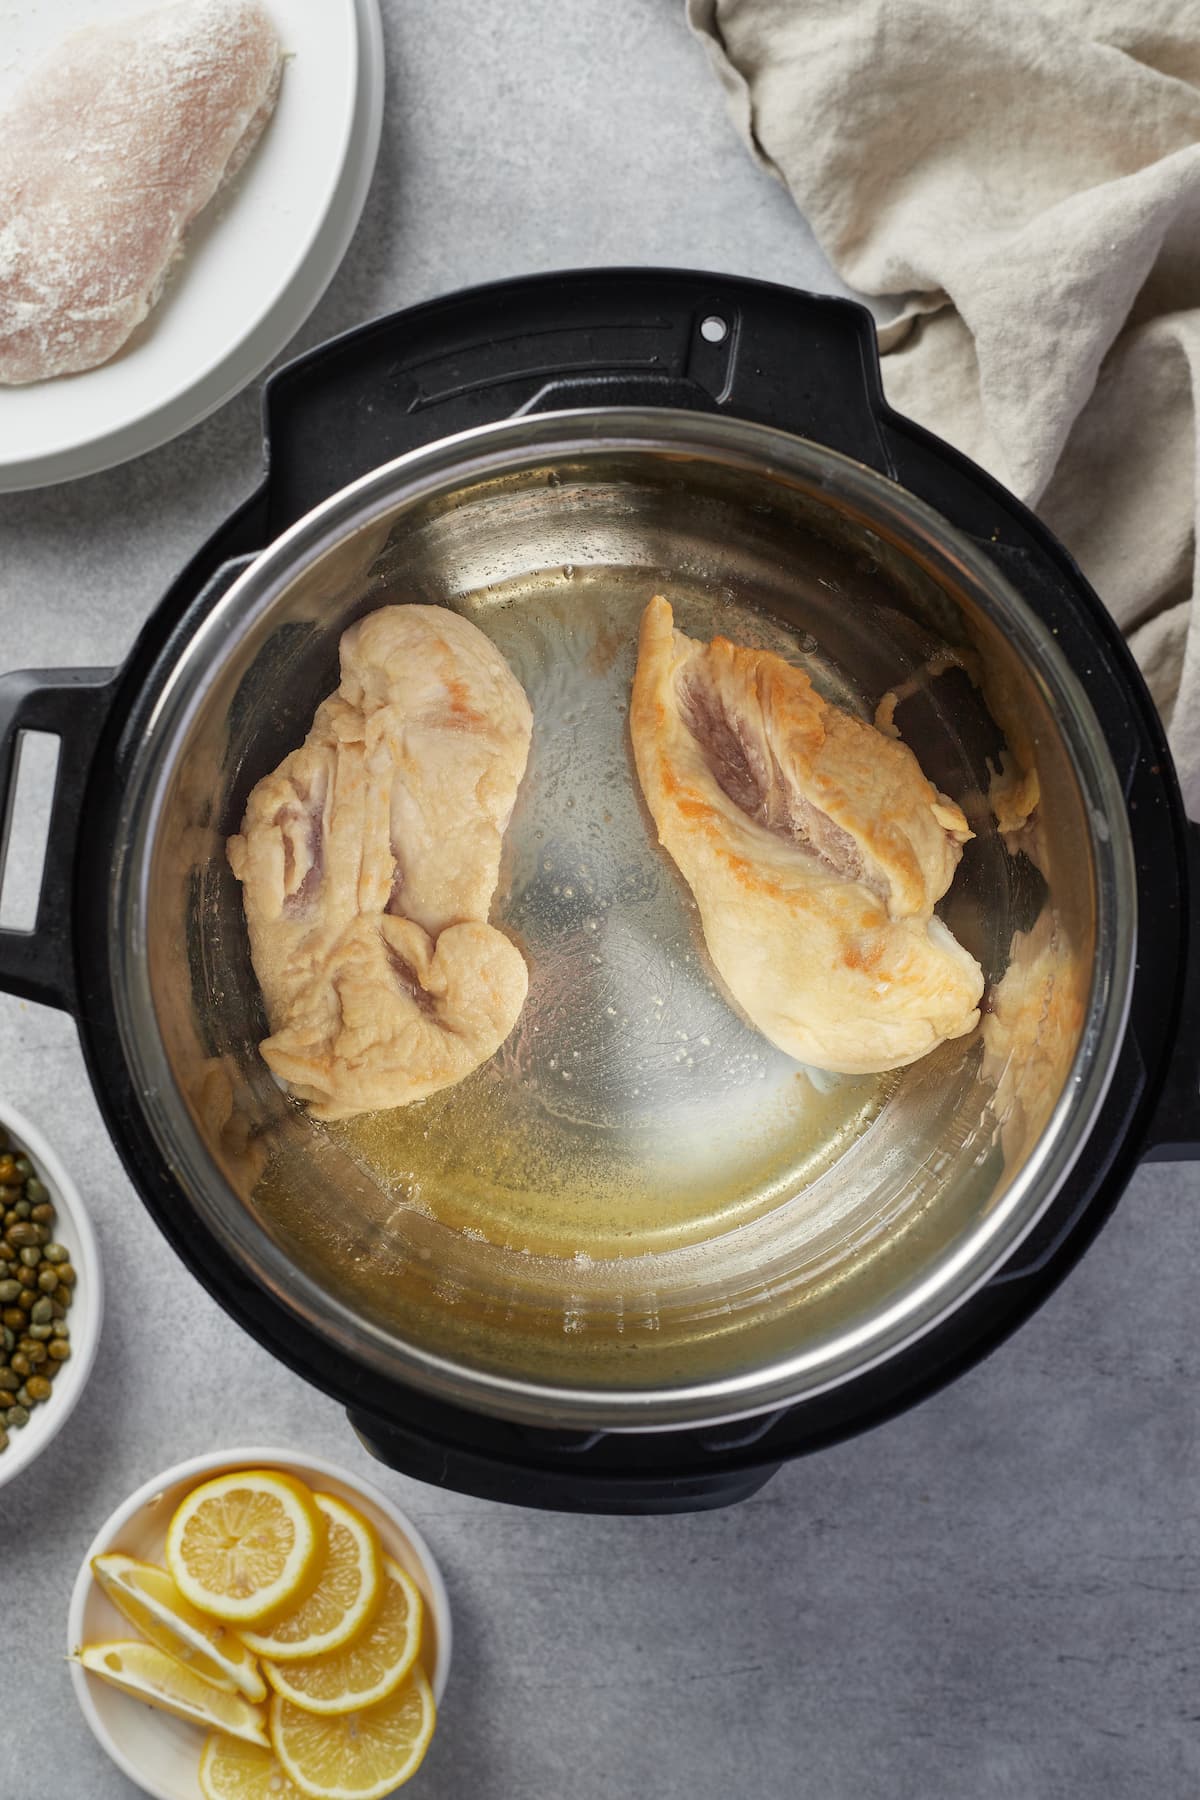 Chicken breasts are browned in the bowl of an Instant Pot.